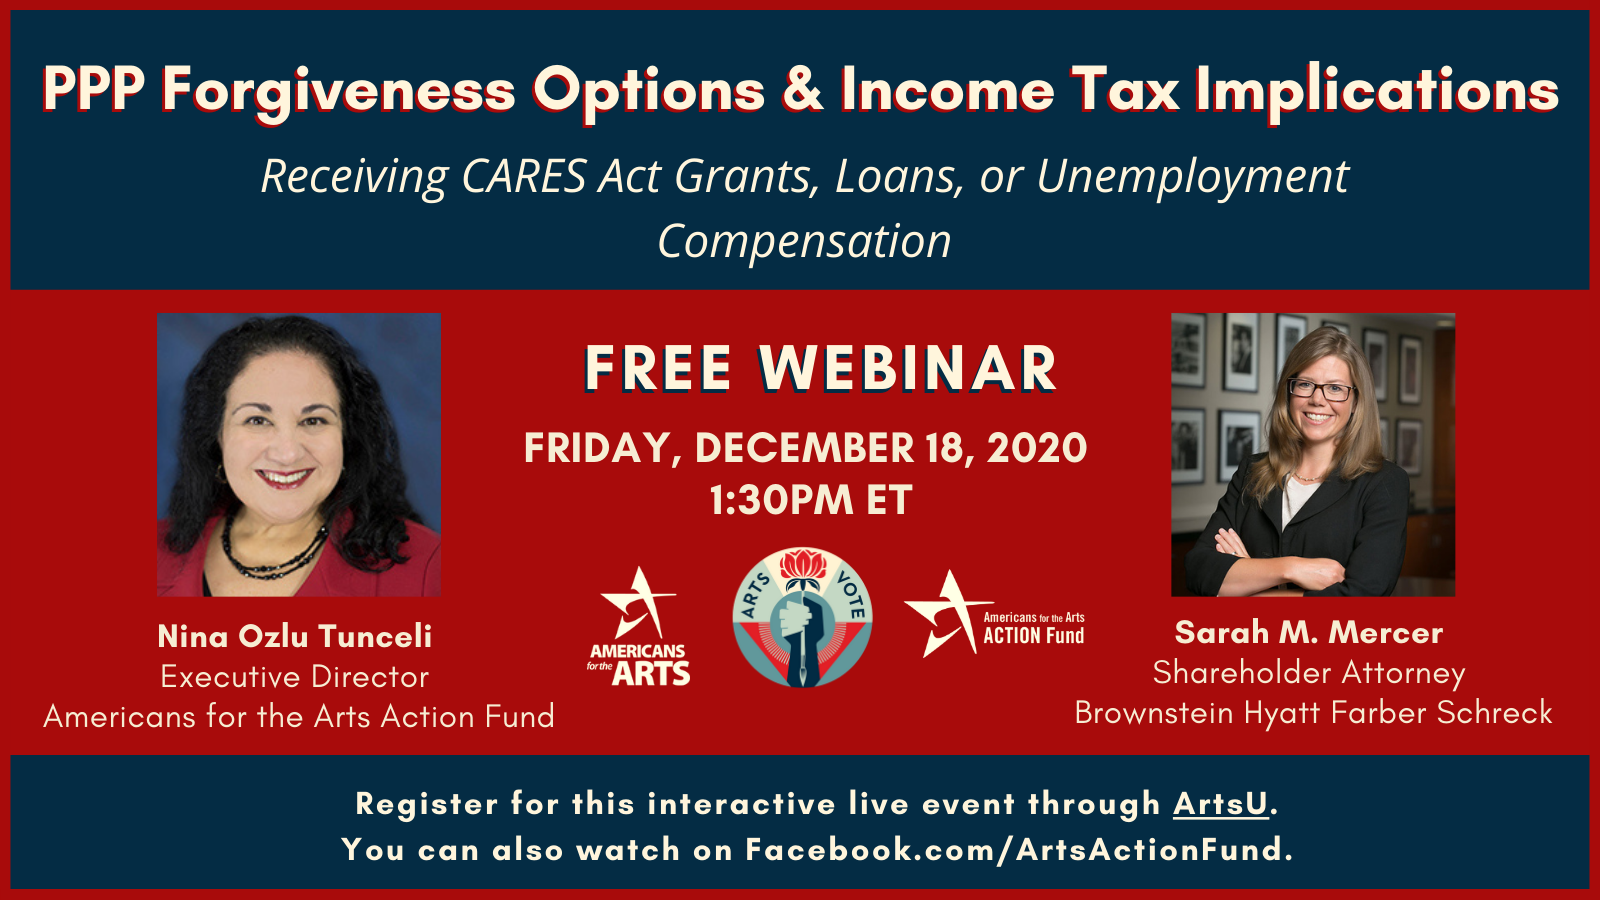 PPP Forgiveness and Tax Implication Webinar December 18, 2020 at 1:30pm ET